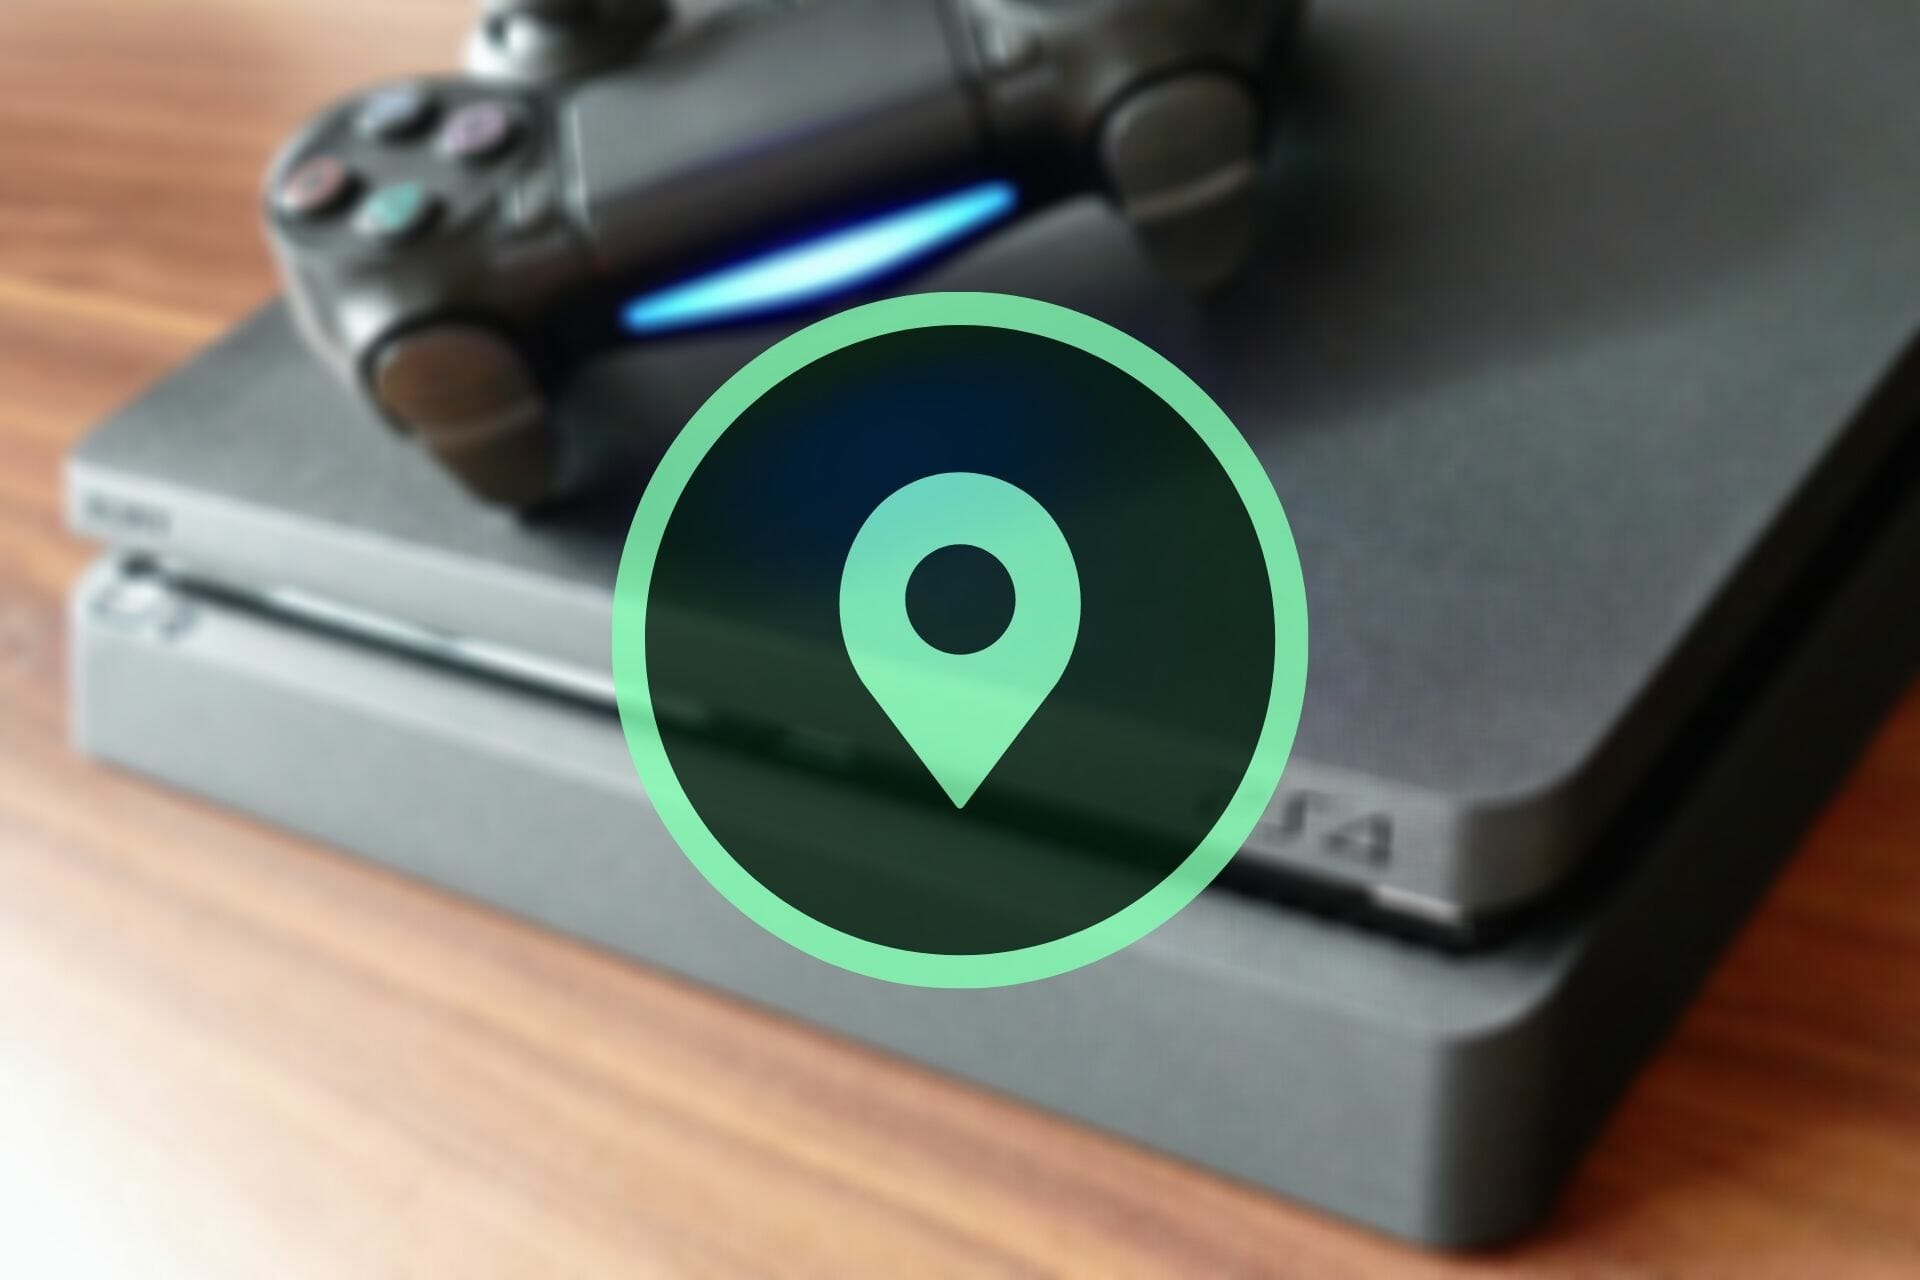 How to change region on PS4